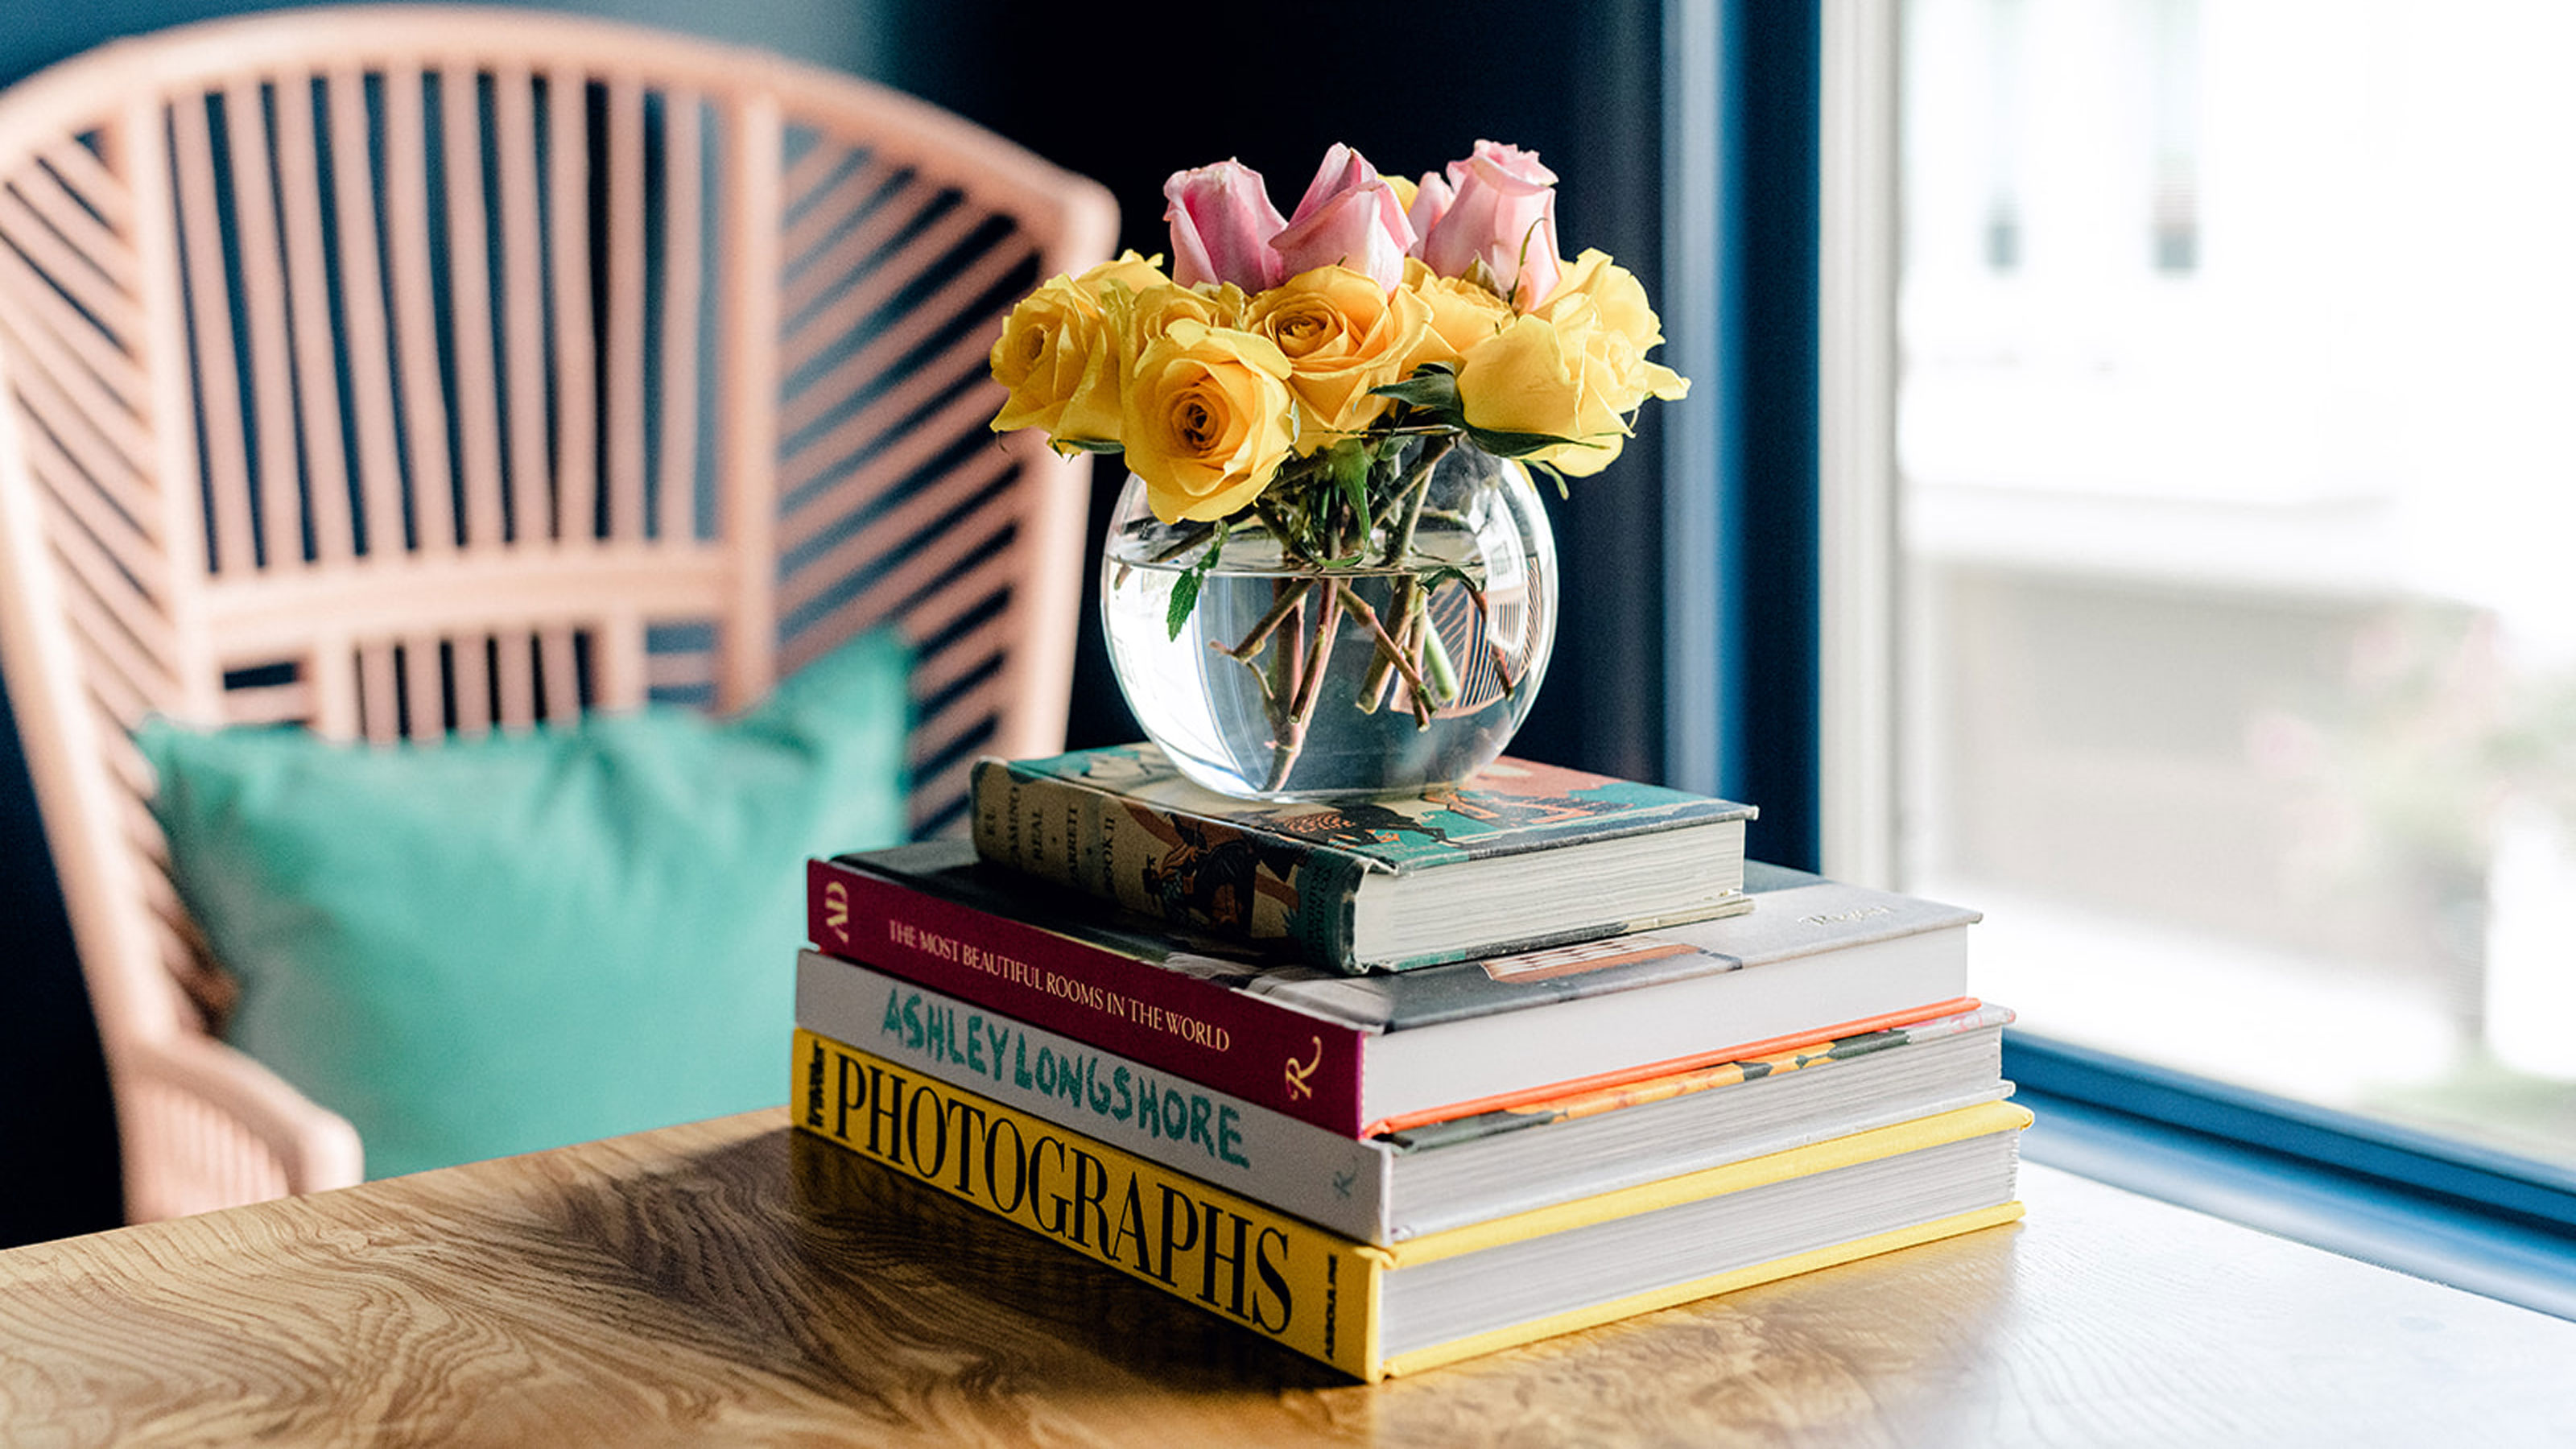 Make A Statement with Curated Coffee Table Books